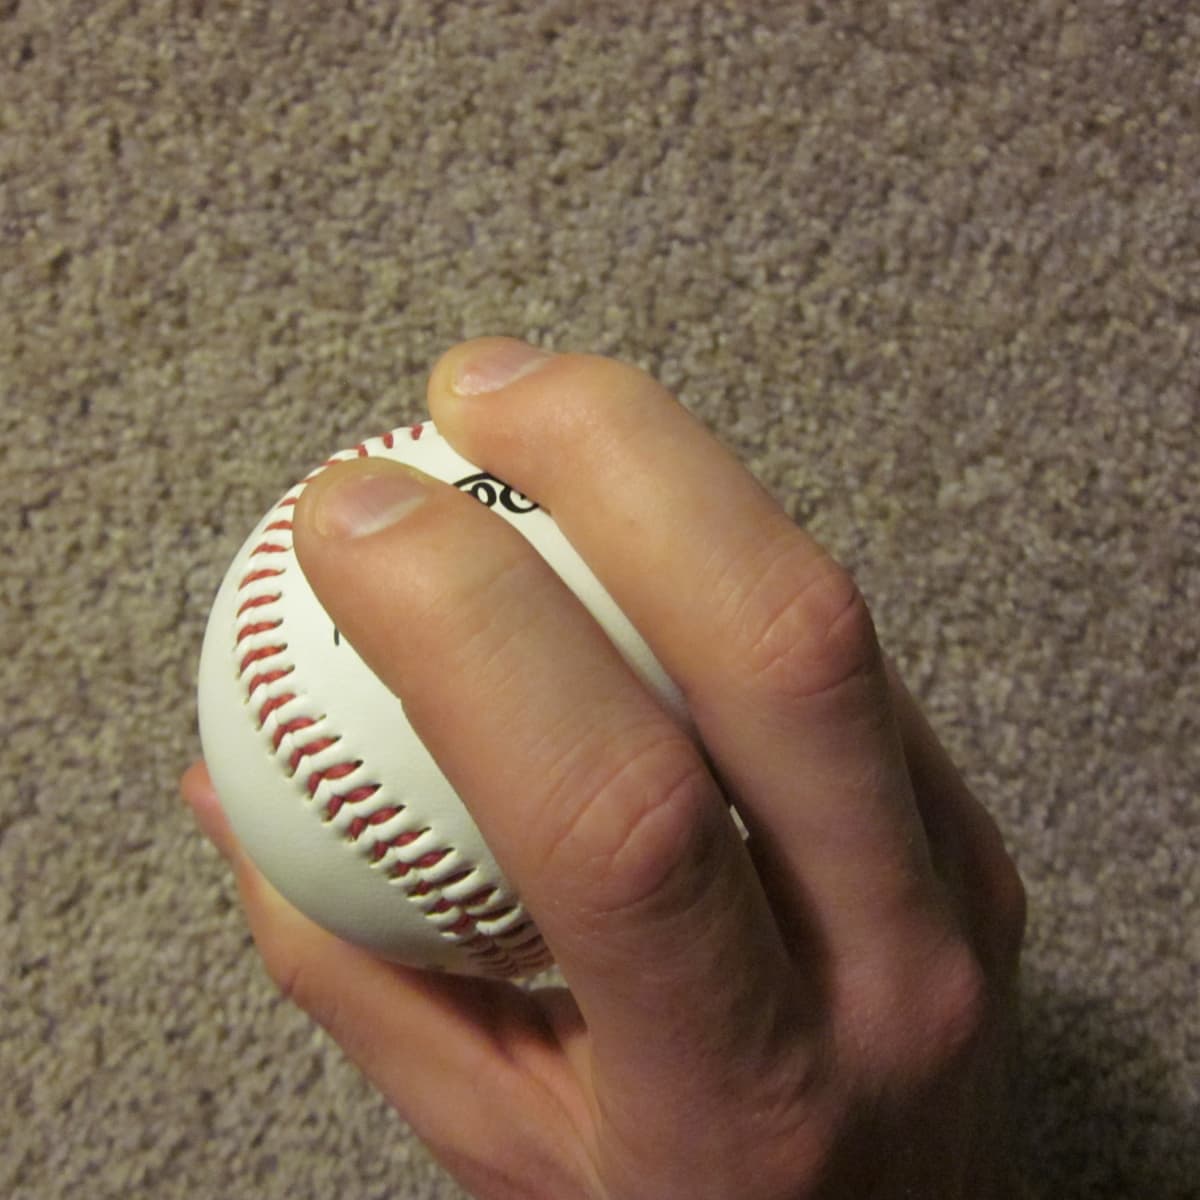 How to Throw a Sinker That Will Bring Batters to Their Knees